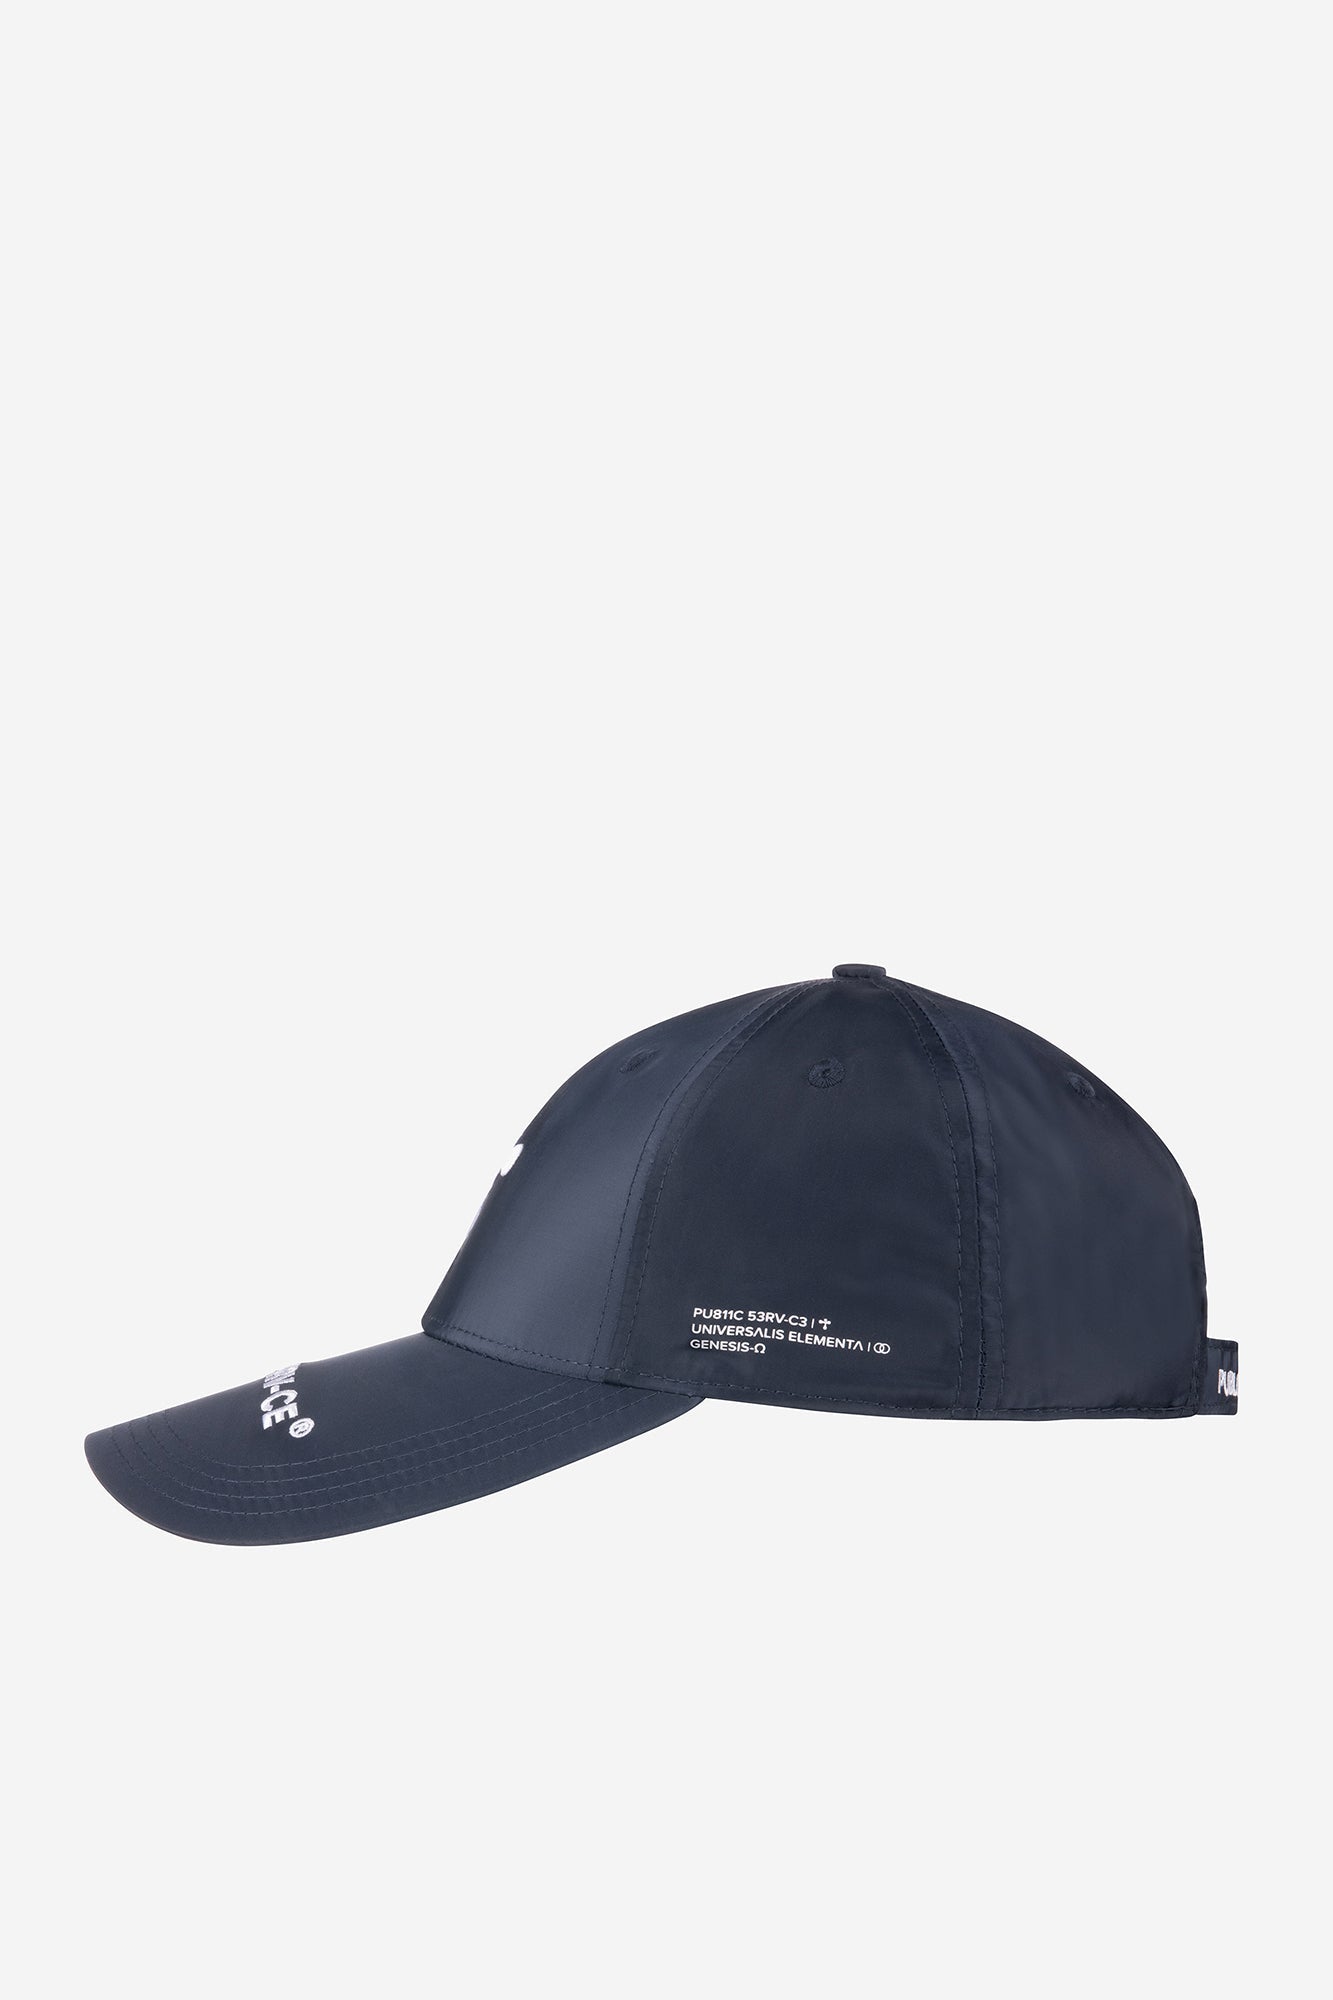 alt=" profile of blue cap with 3D stitching, elongated visor and prints"